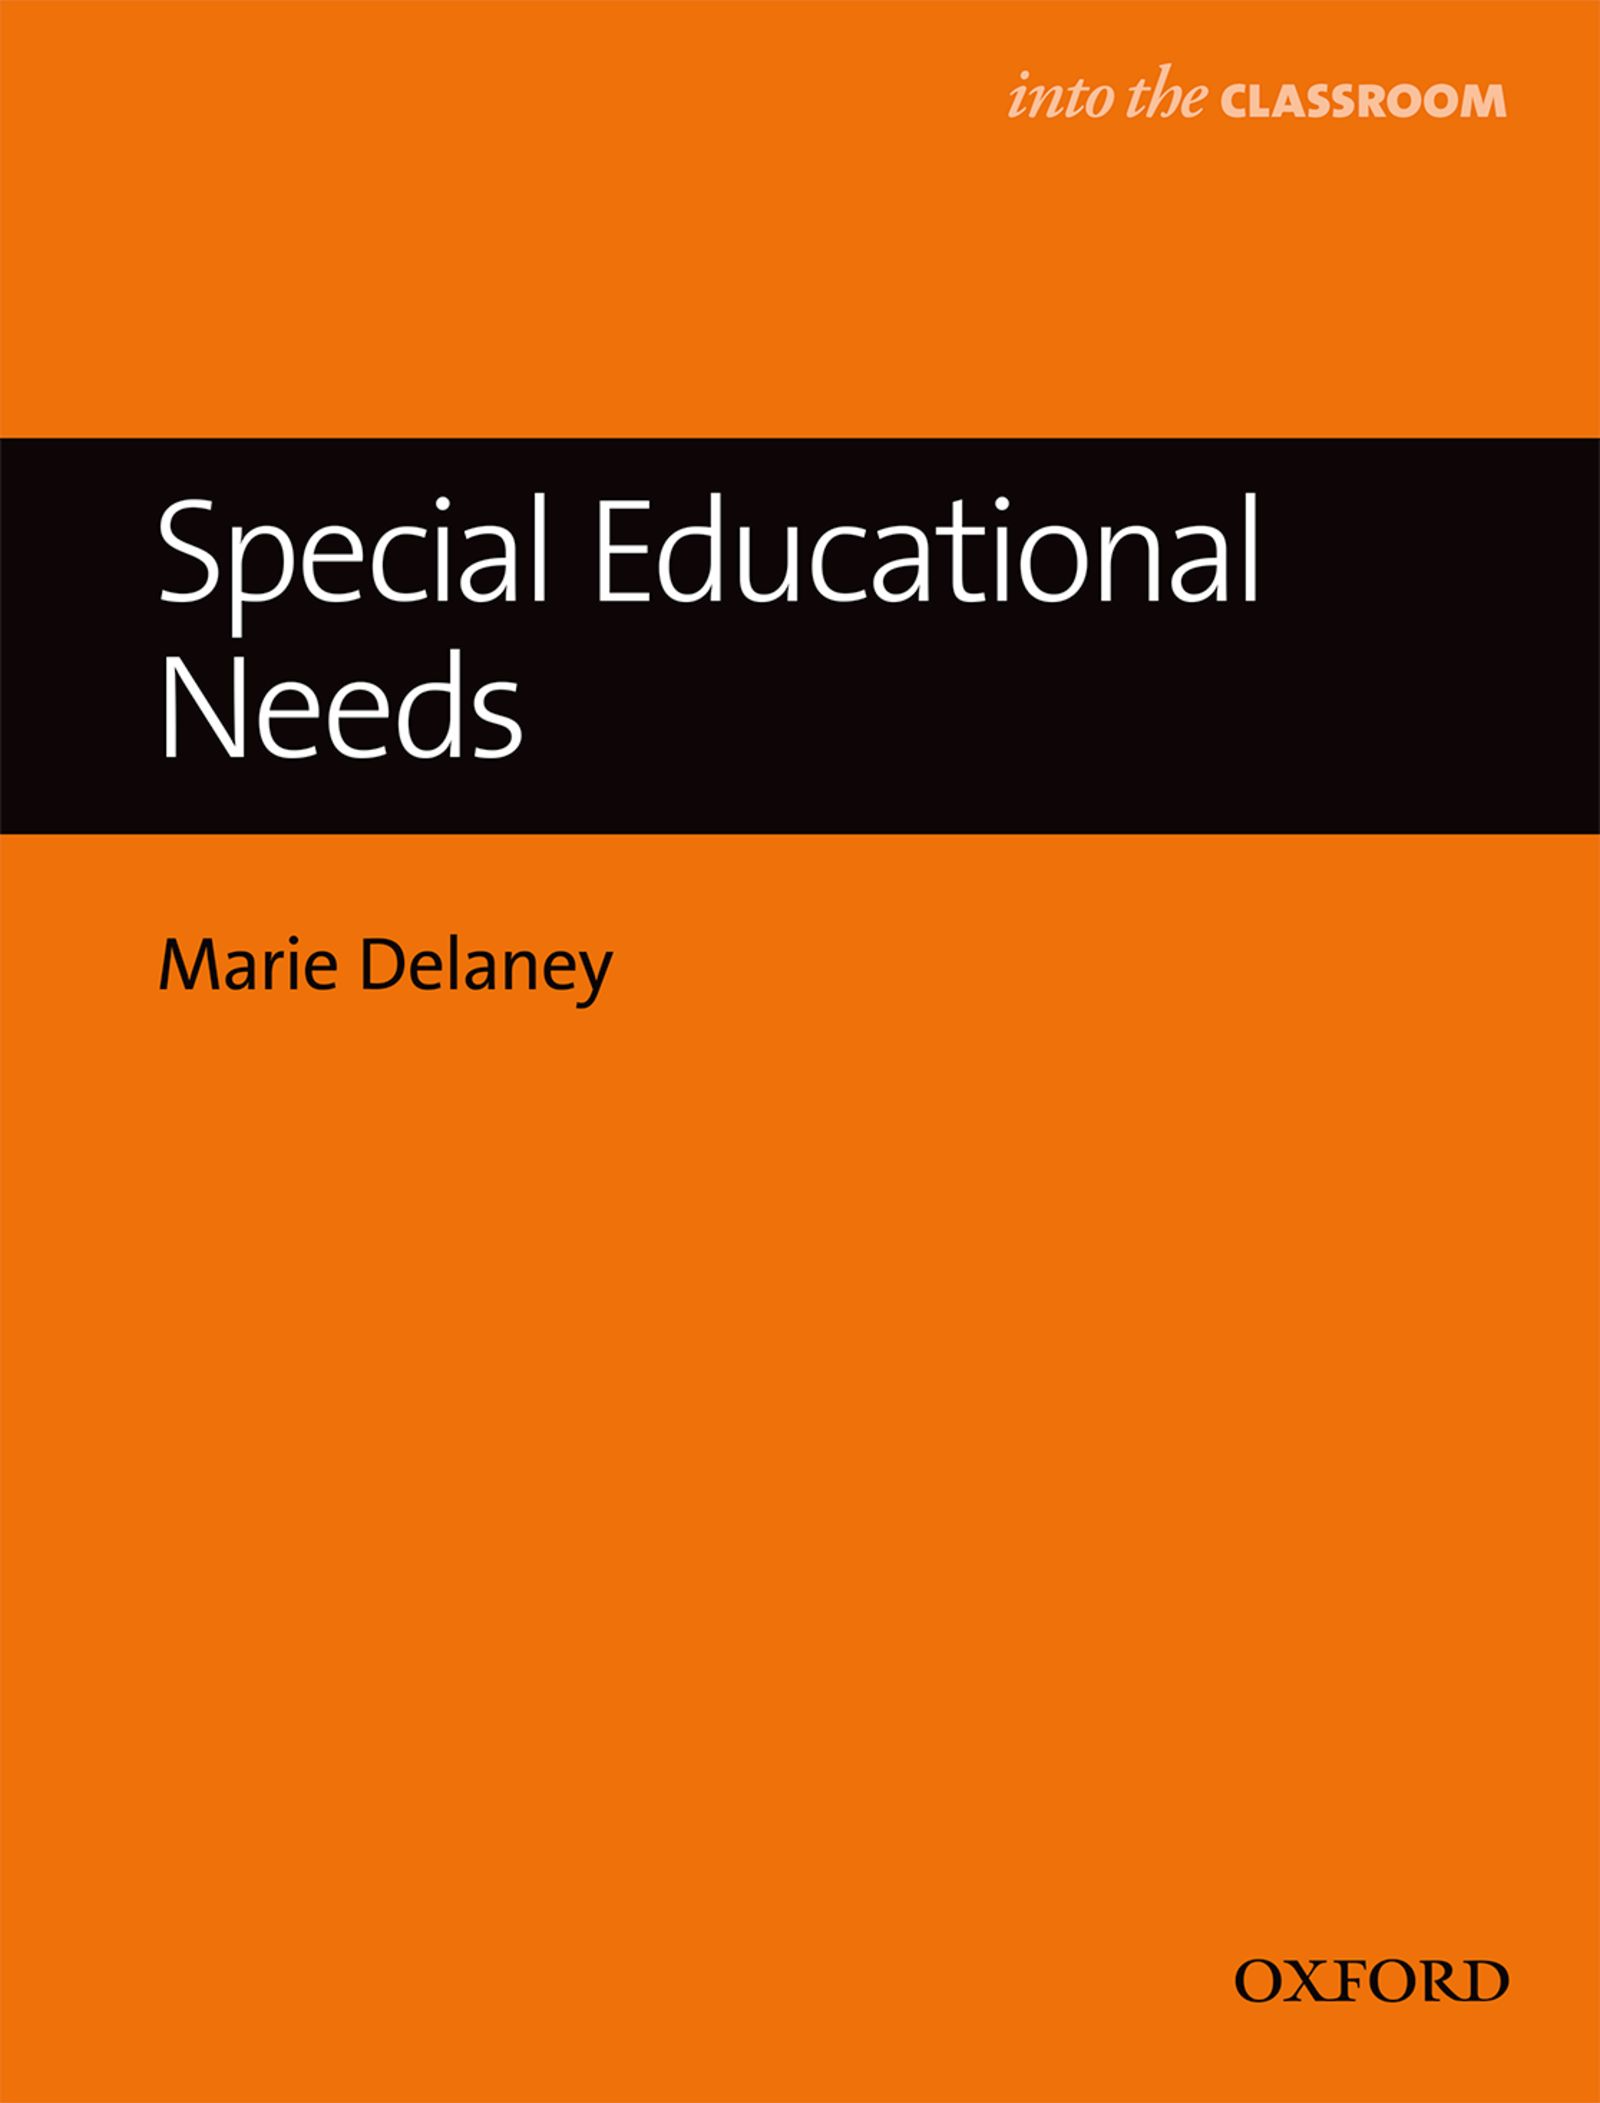 Special Educational Needs - Into the Classroom